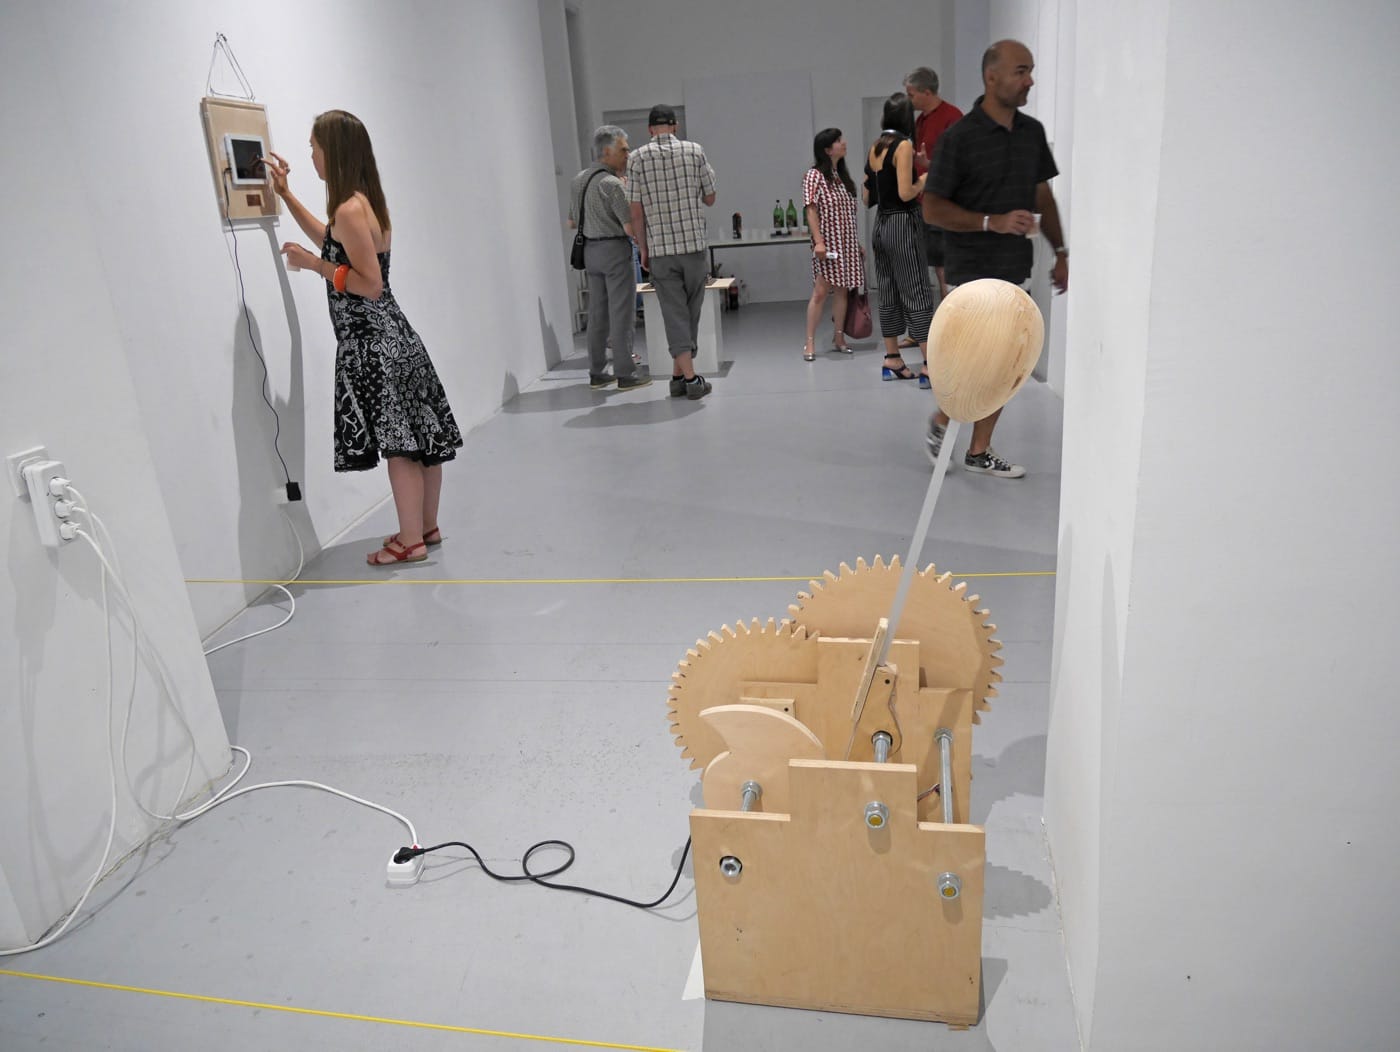 From left to right works by Nikoletta Boncheva, Stefan Donchev (in the background) and Albena Baeva